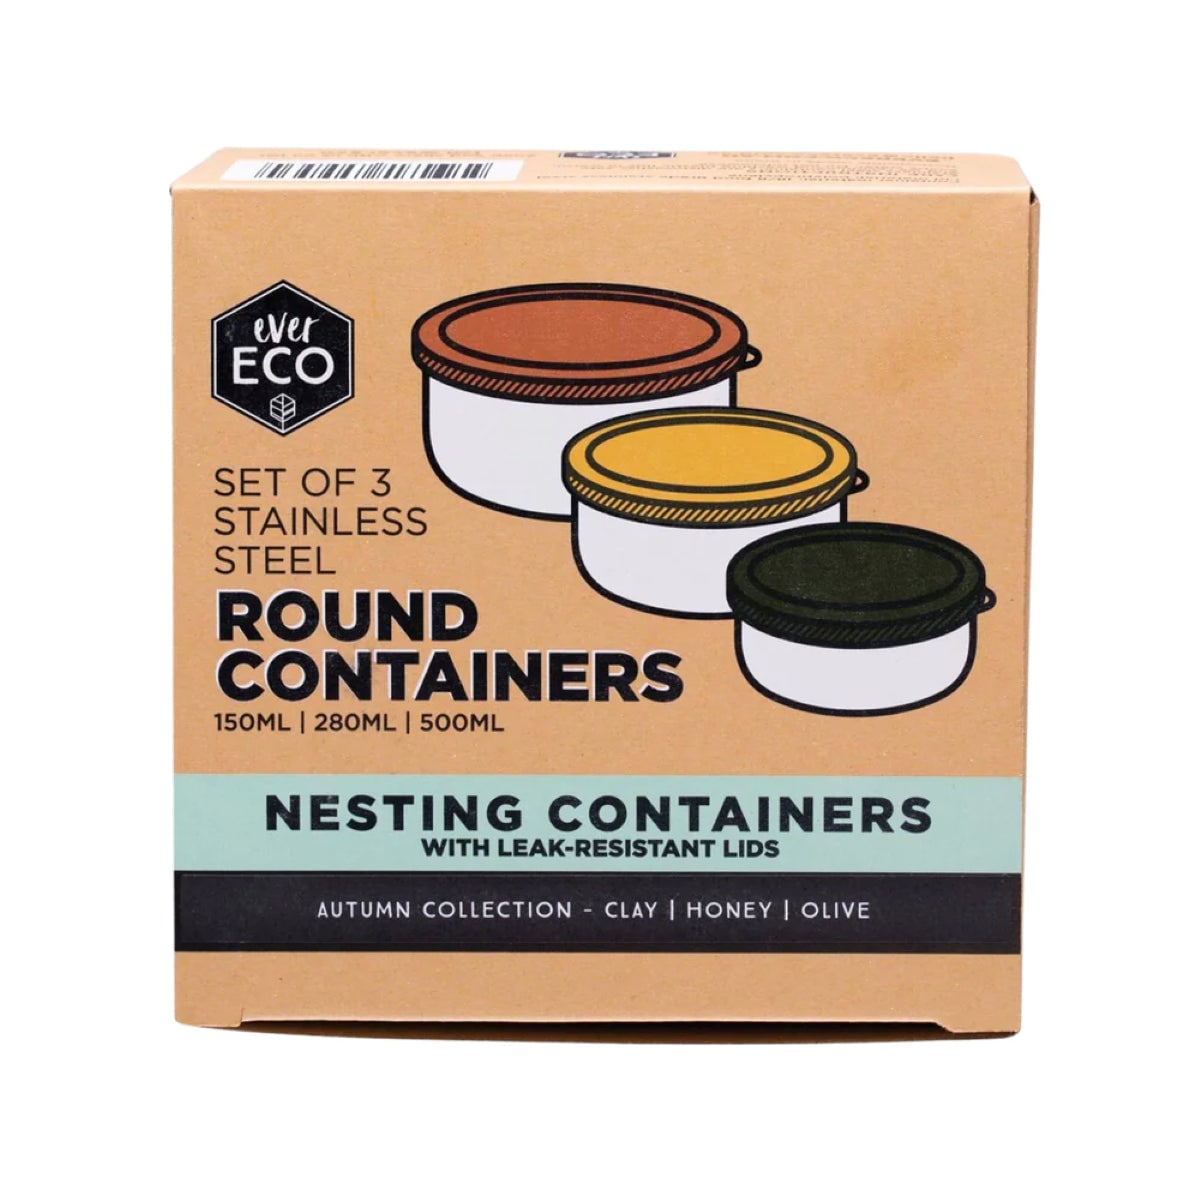 Ever Eco Stainless Steel Round Nesting Containers Autumn Collection 3 Pack